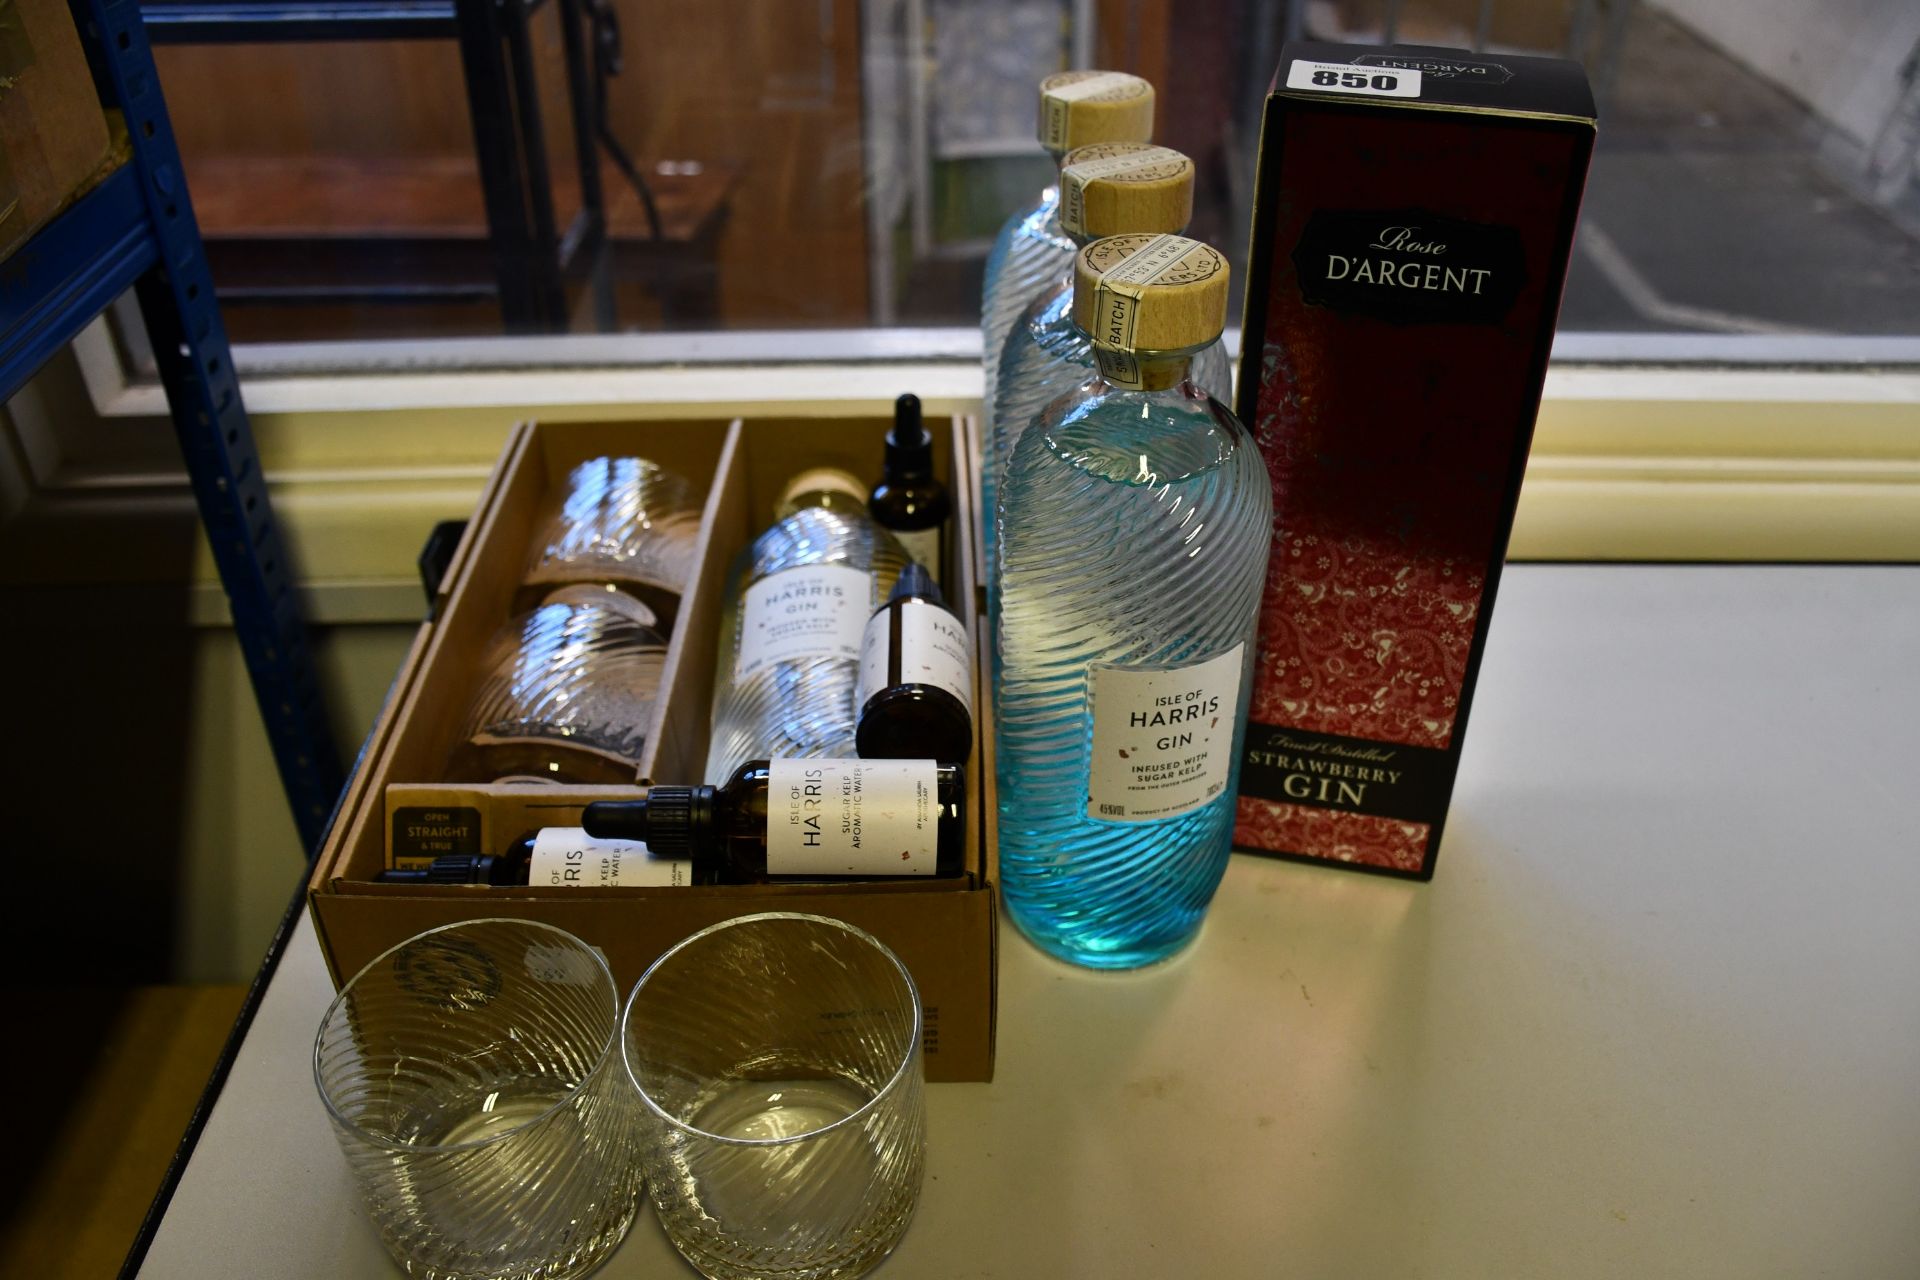 Four bottles of Isle of Harris Gin (70cl) and one bottle of Rose D'argent Strawberry Gin (70cl) (